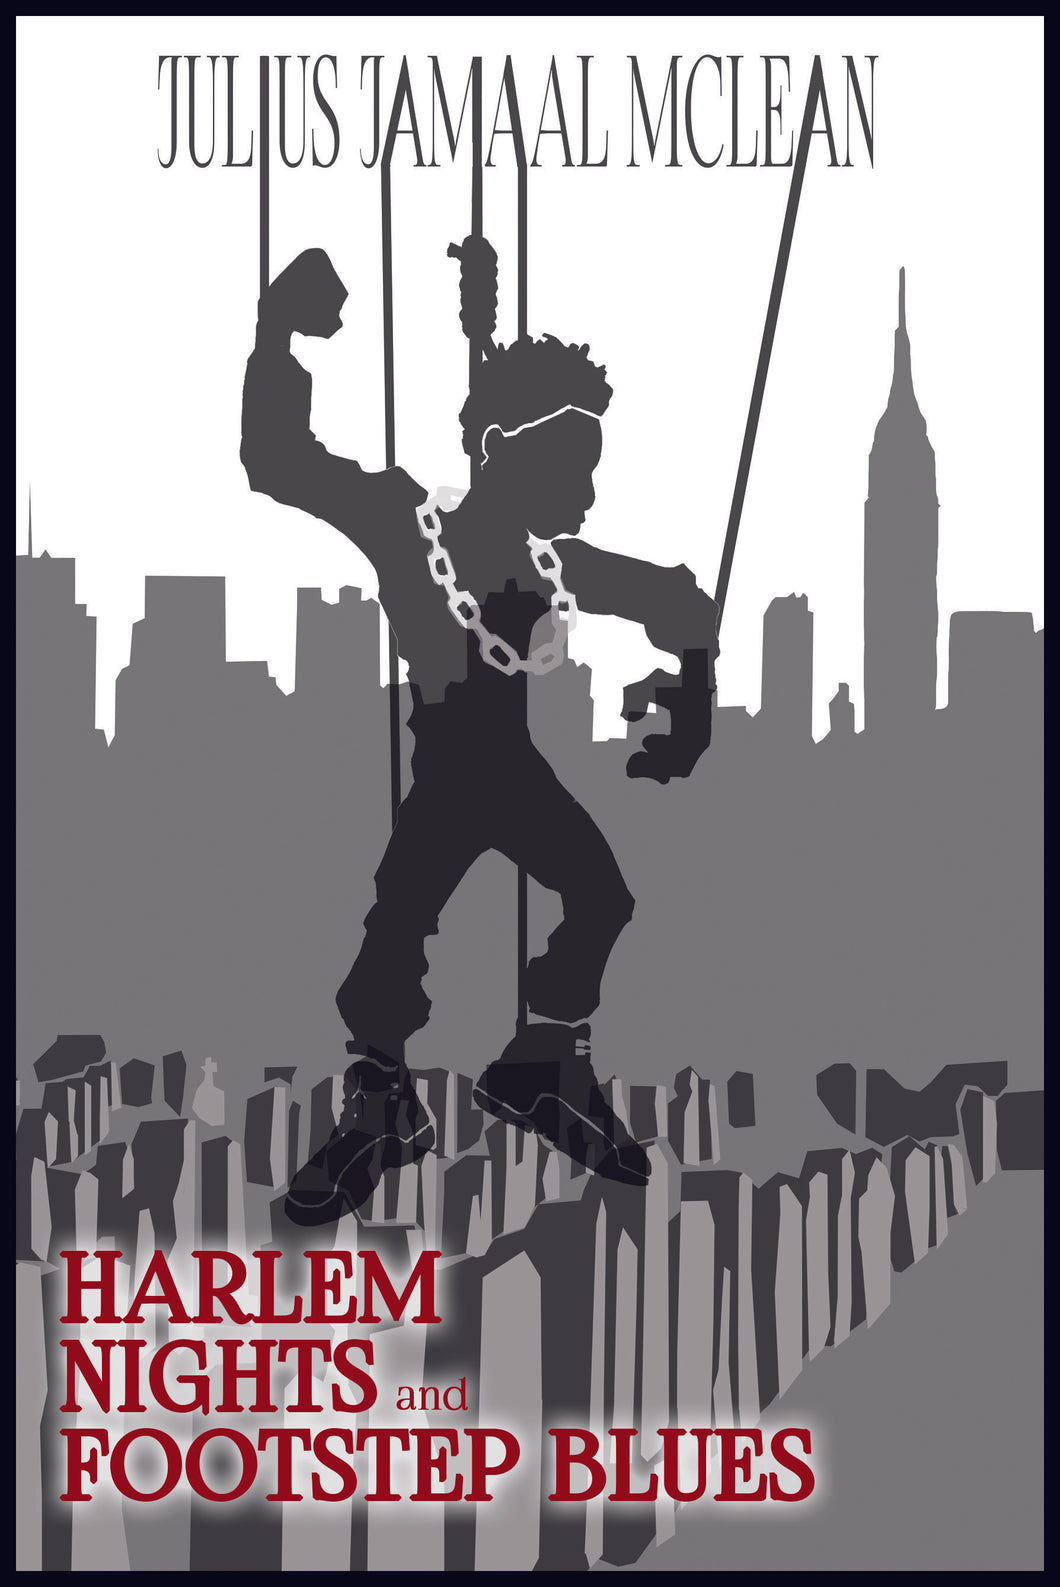 Harlem Nights and Footstep Blues Ebook in EPUB Format